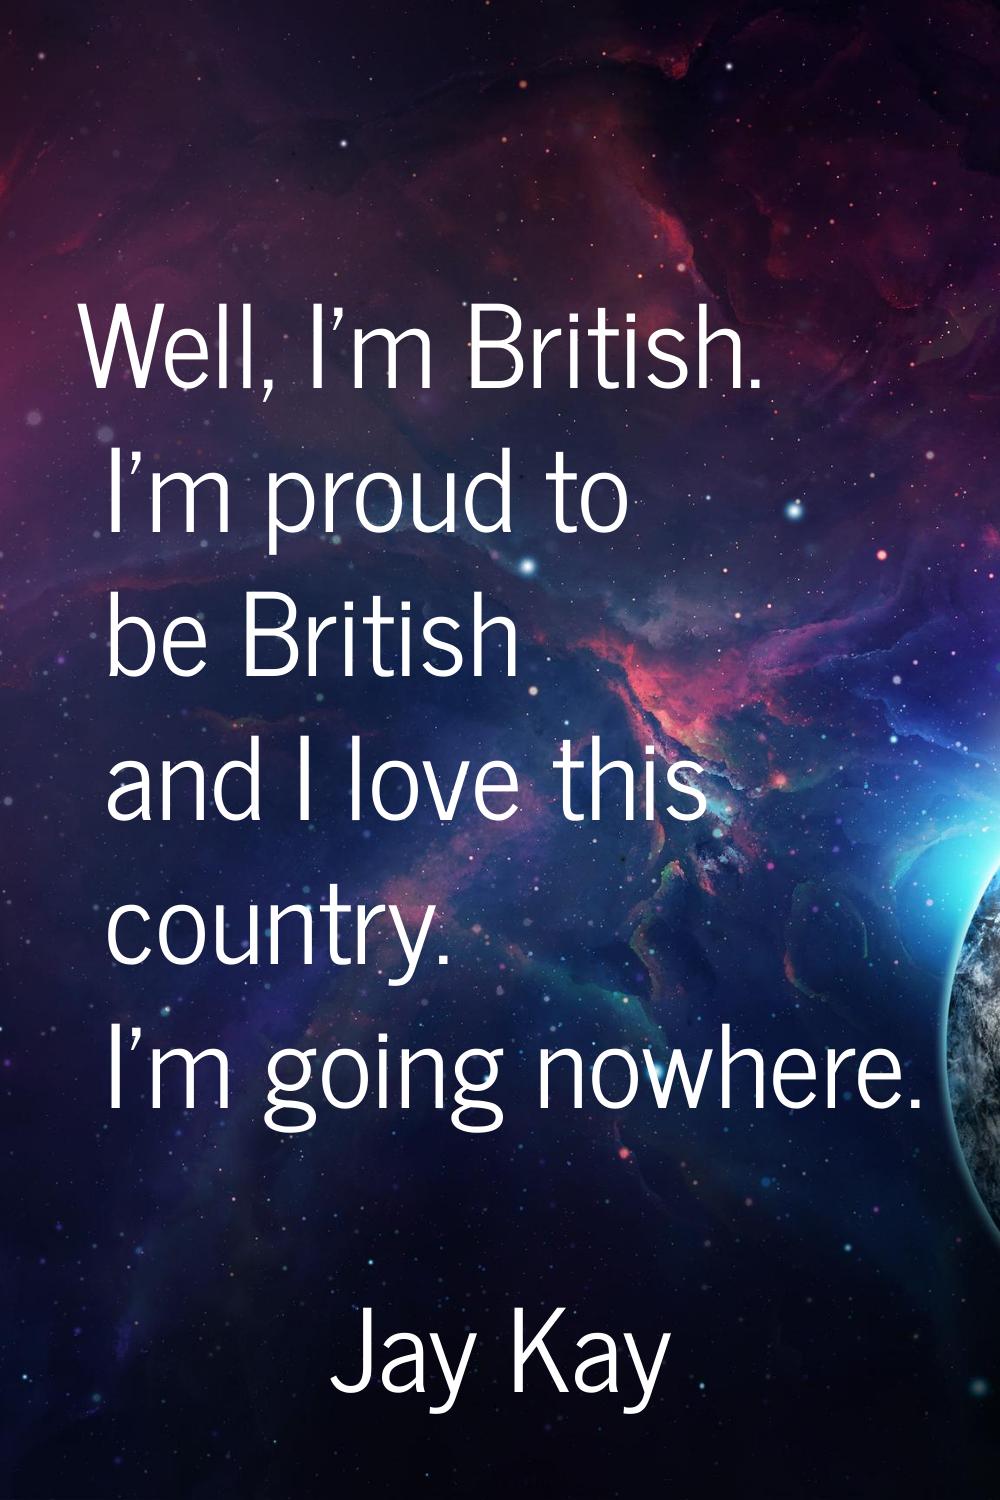 Well, I'm British. I'm proud to be British and I love this country. I'm going nowhere.